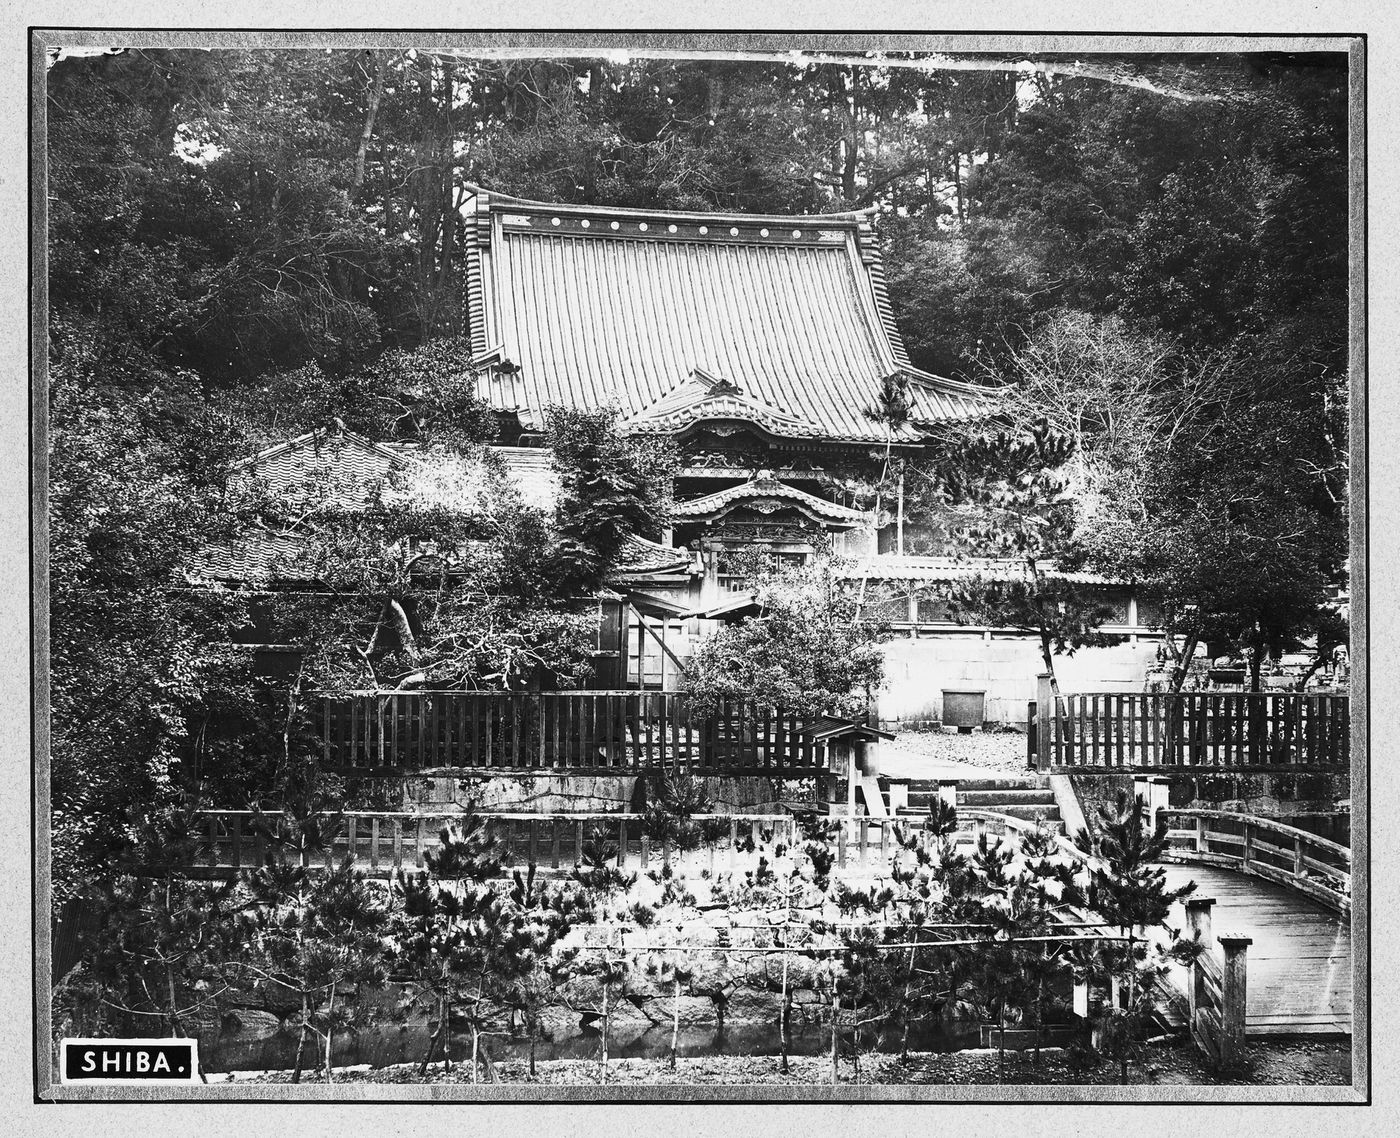 View of temple structures, Shiba Ward, Edo (now Tokyo), Japan